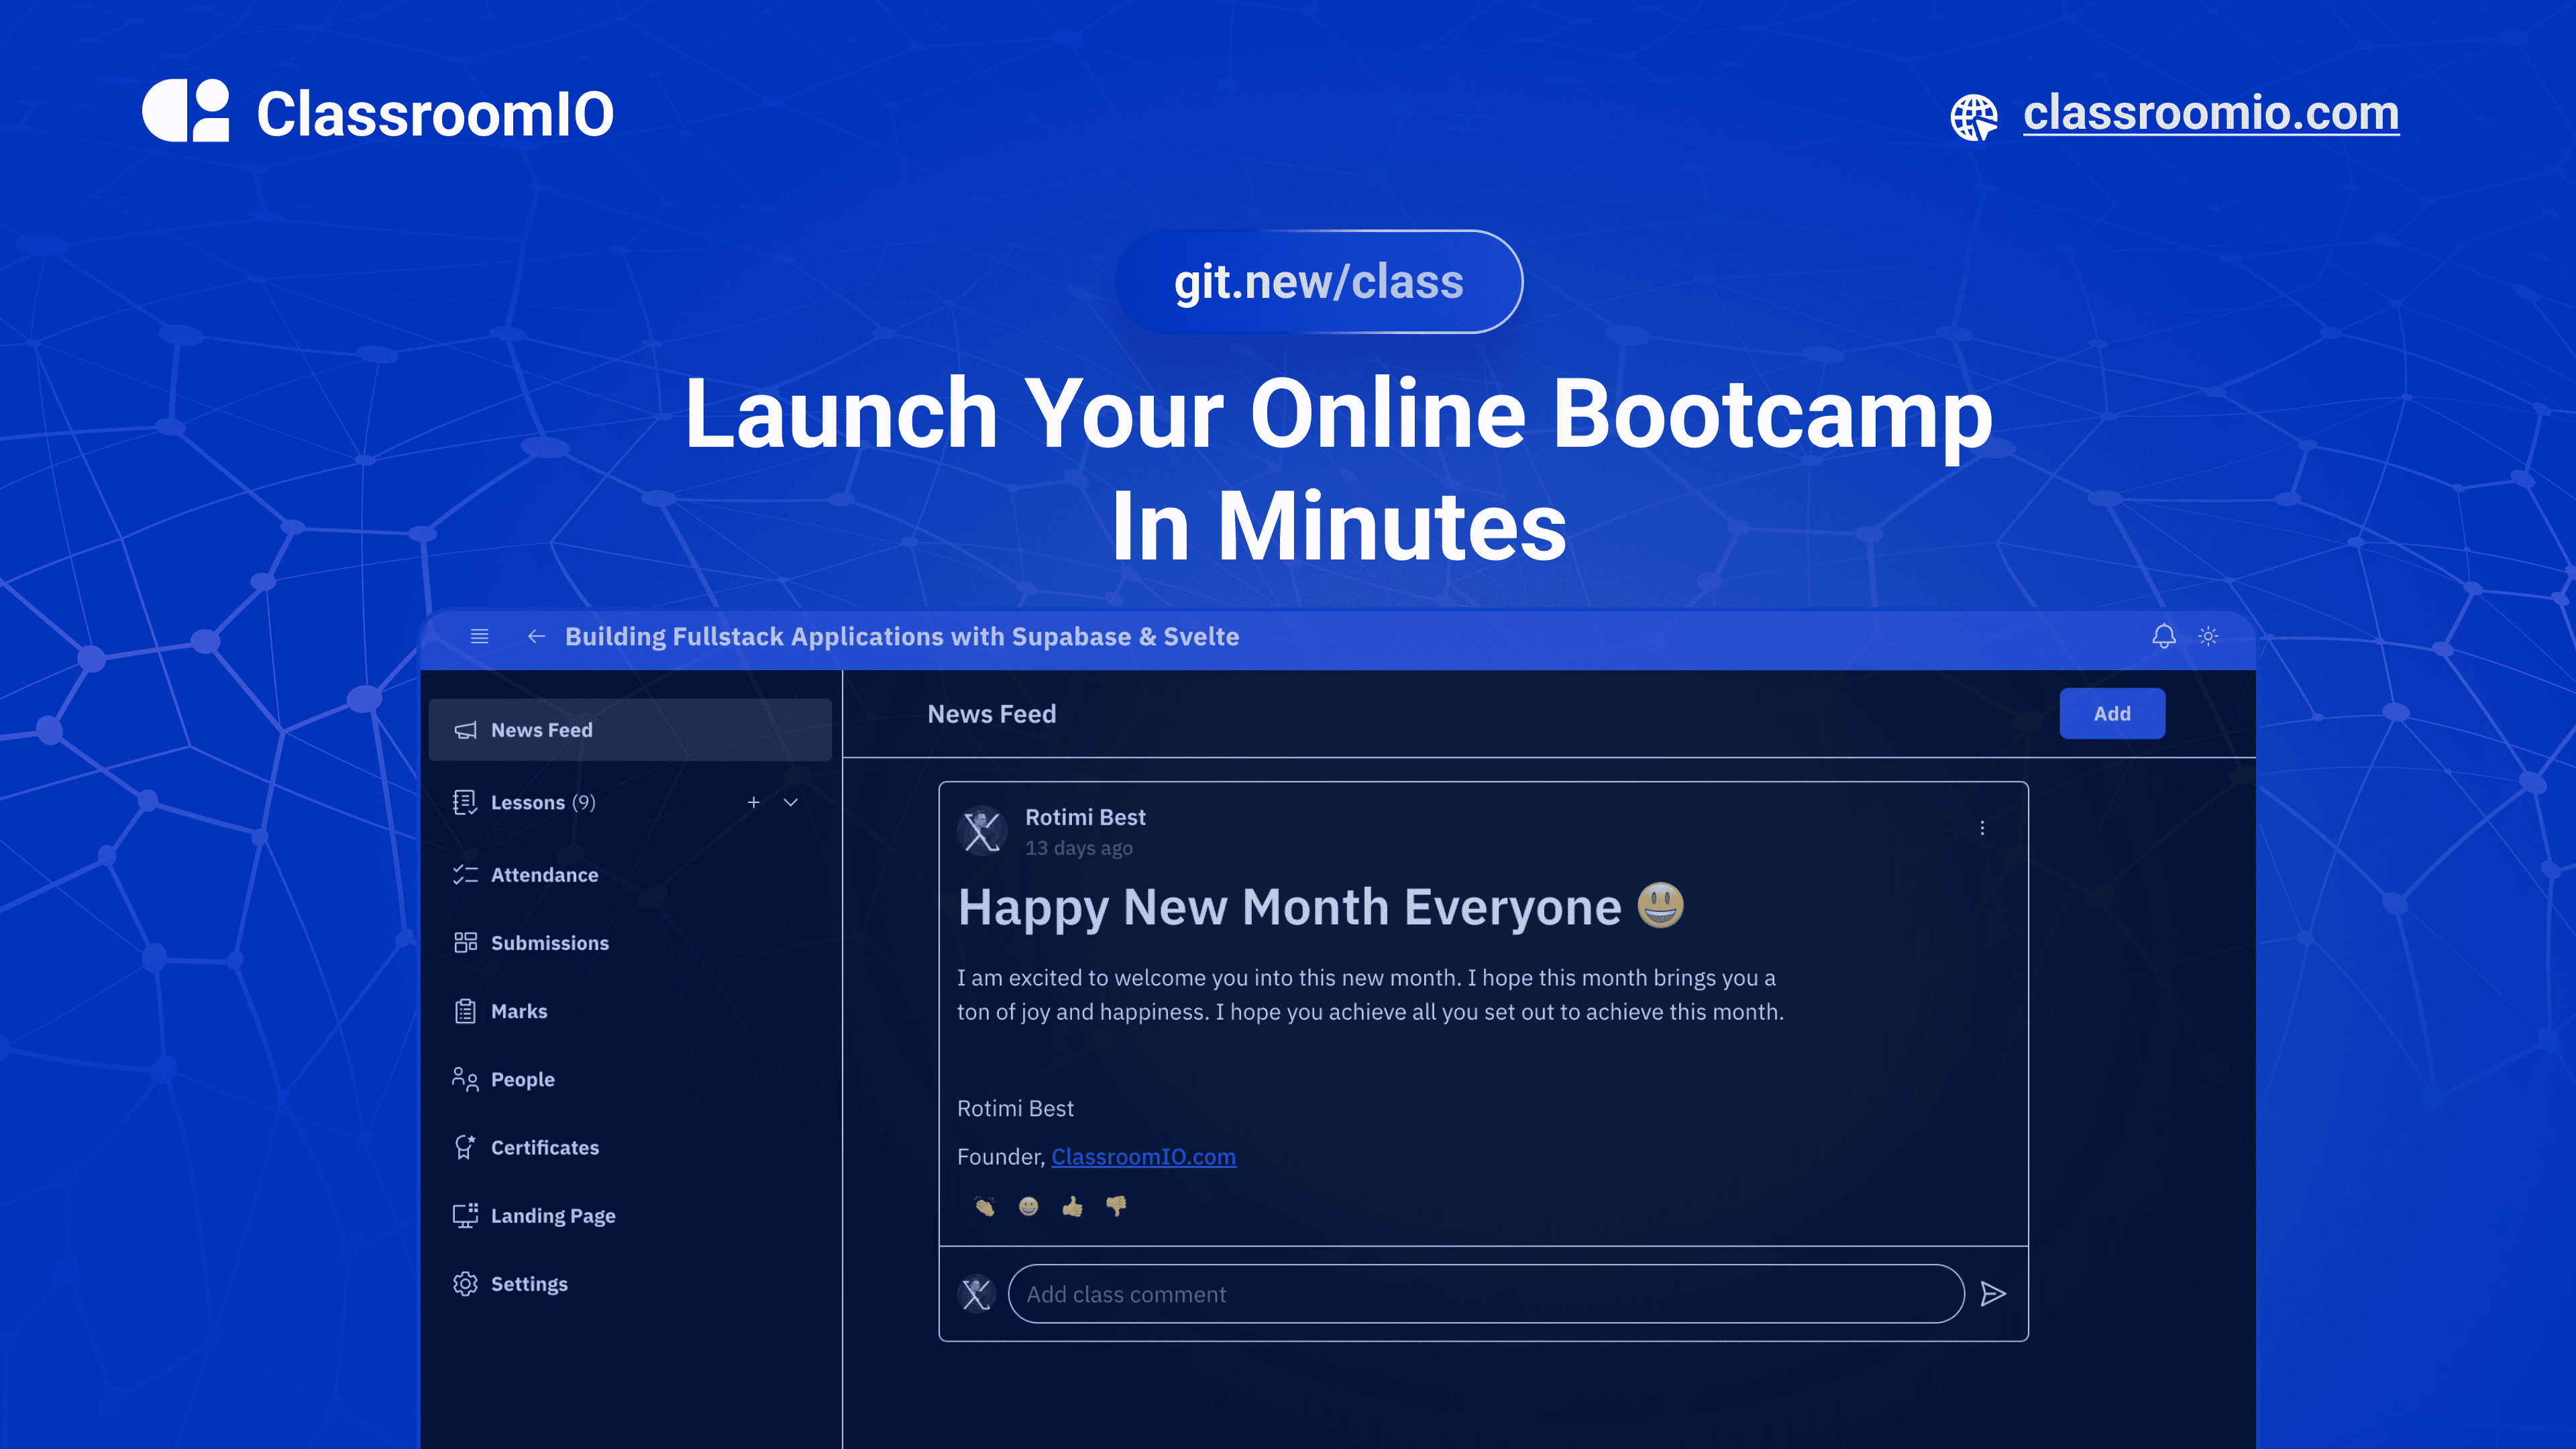 ClassroomIO is a no-code tool that allows you build and scale your online bootcamp with ease.